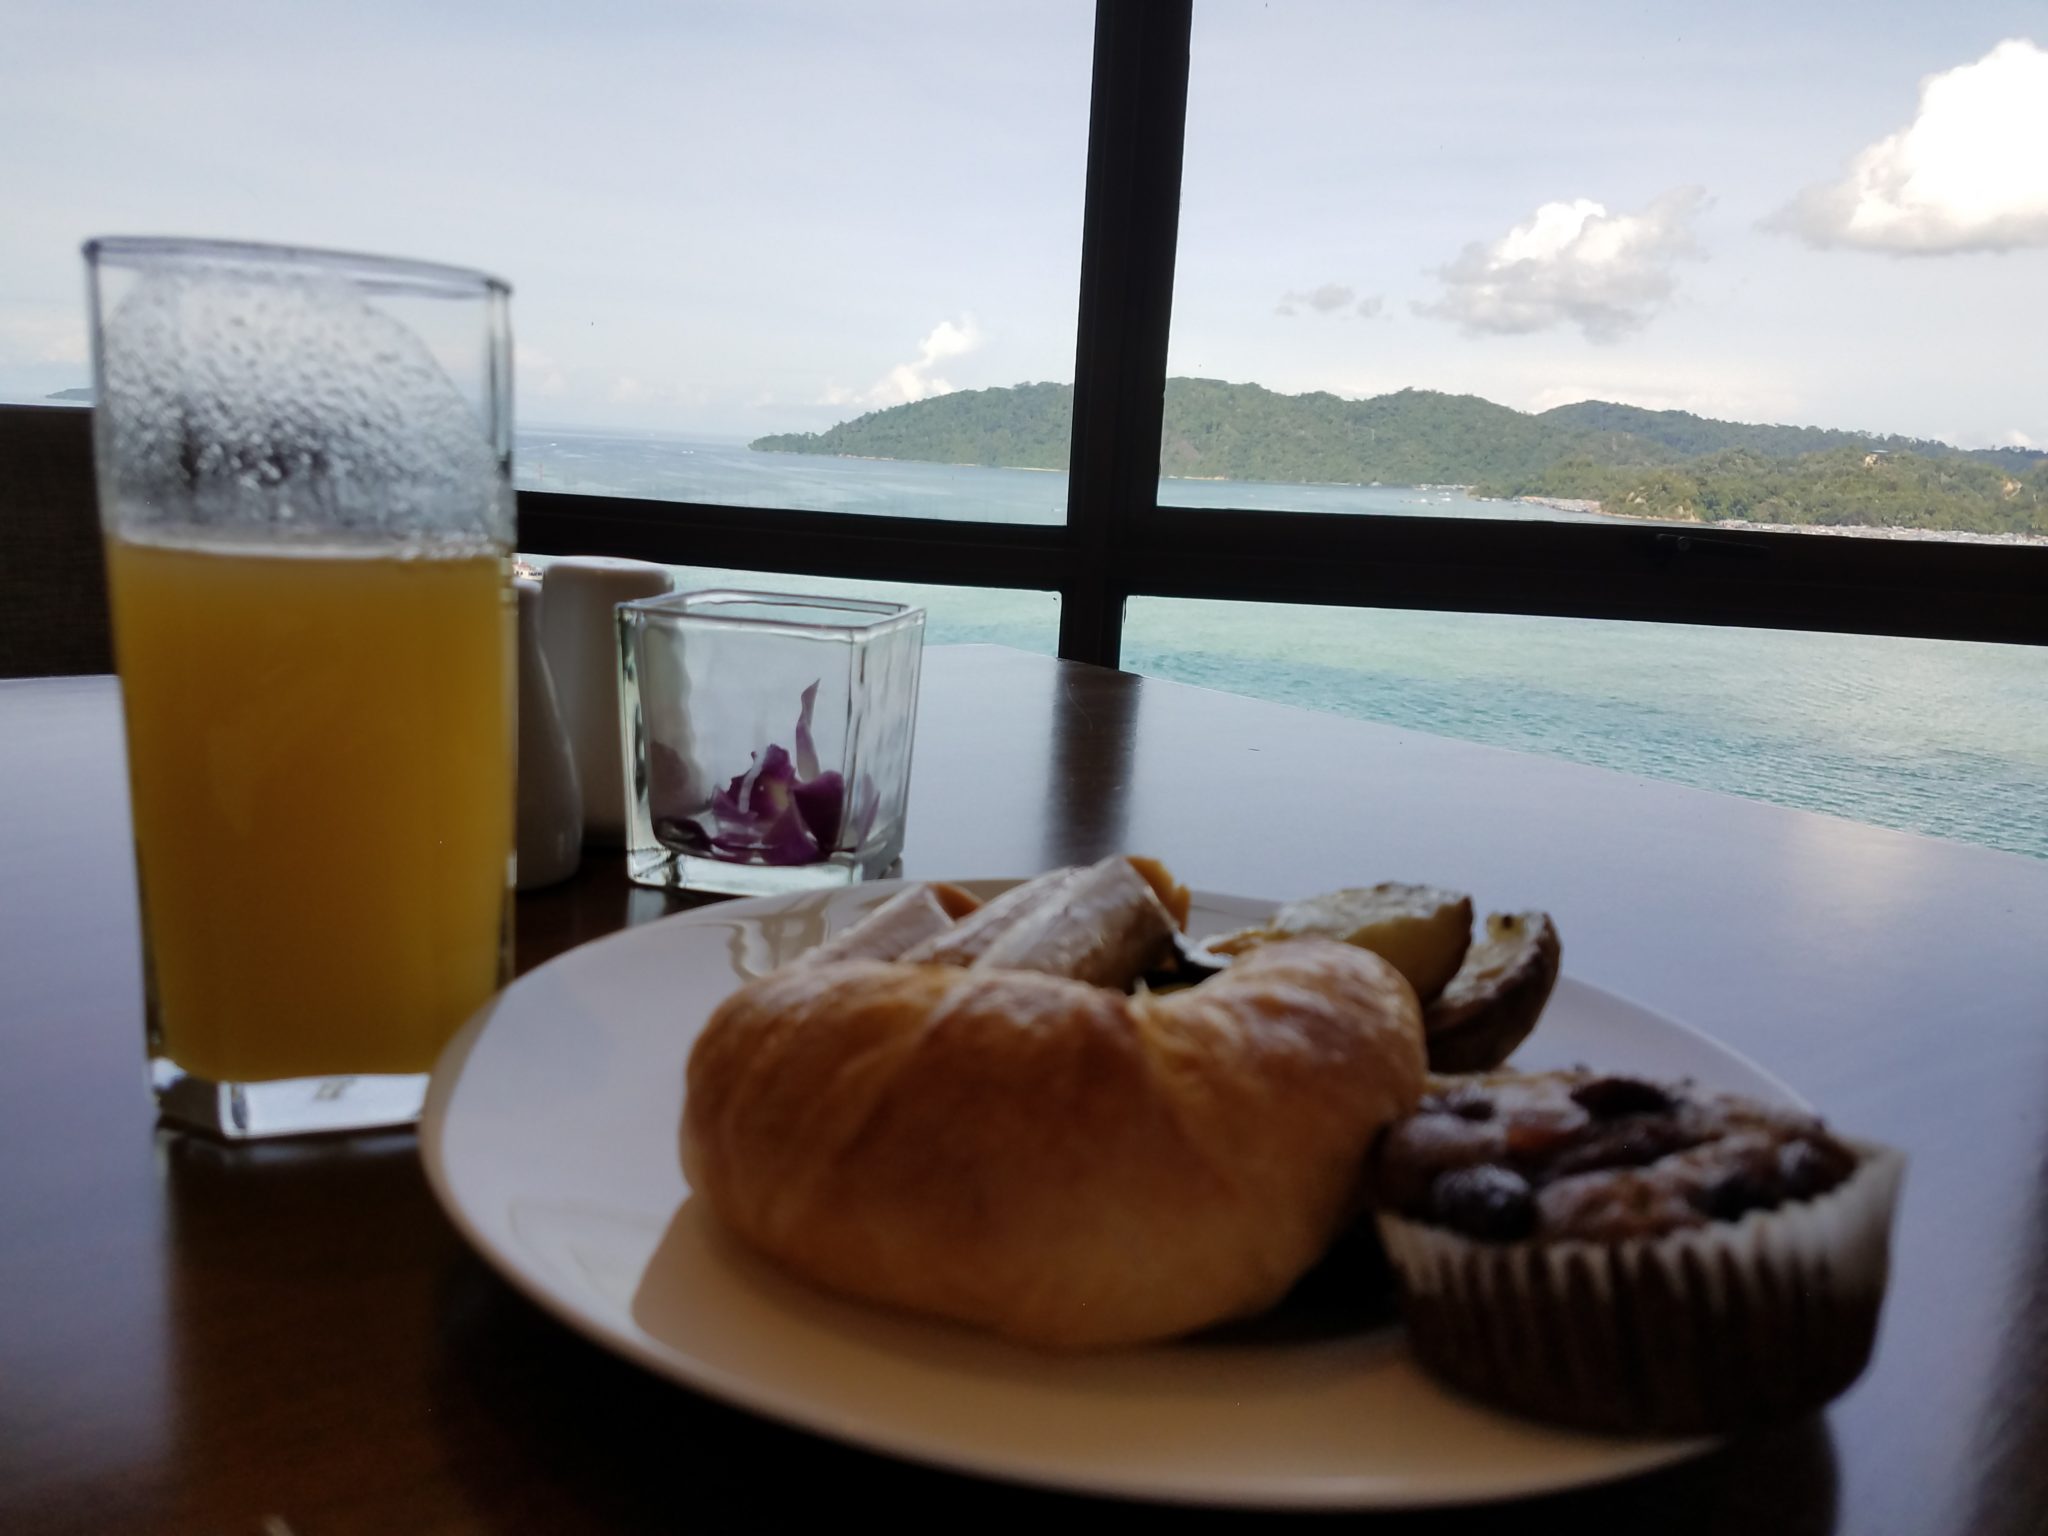 Because of its remote location, it was surprising to find a Hyatt in Borneo. I was even more surprised at the price. It was only 2500 points and $40 a night as opposed to the standard rate of $175.